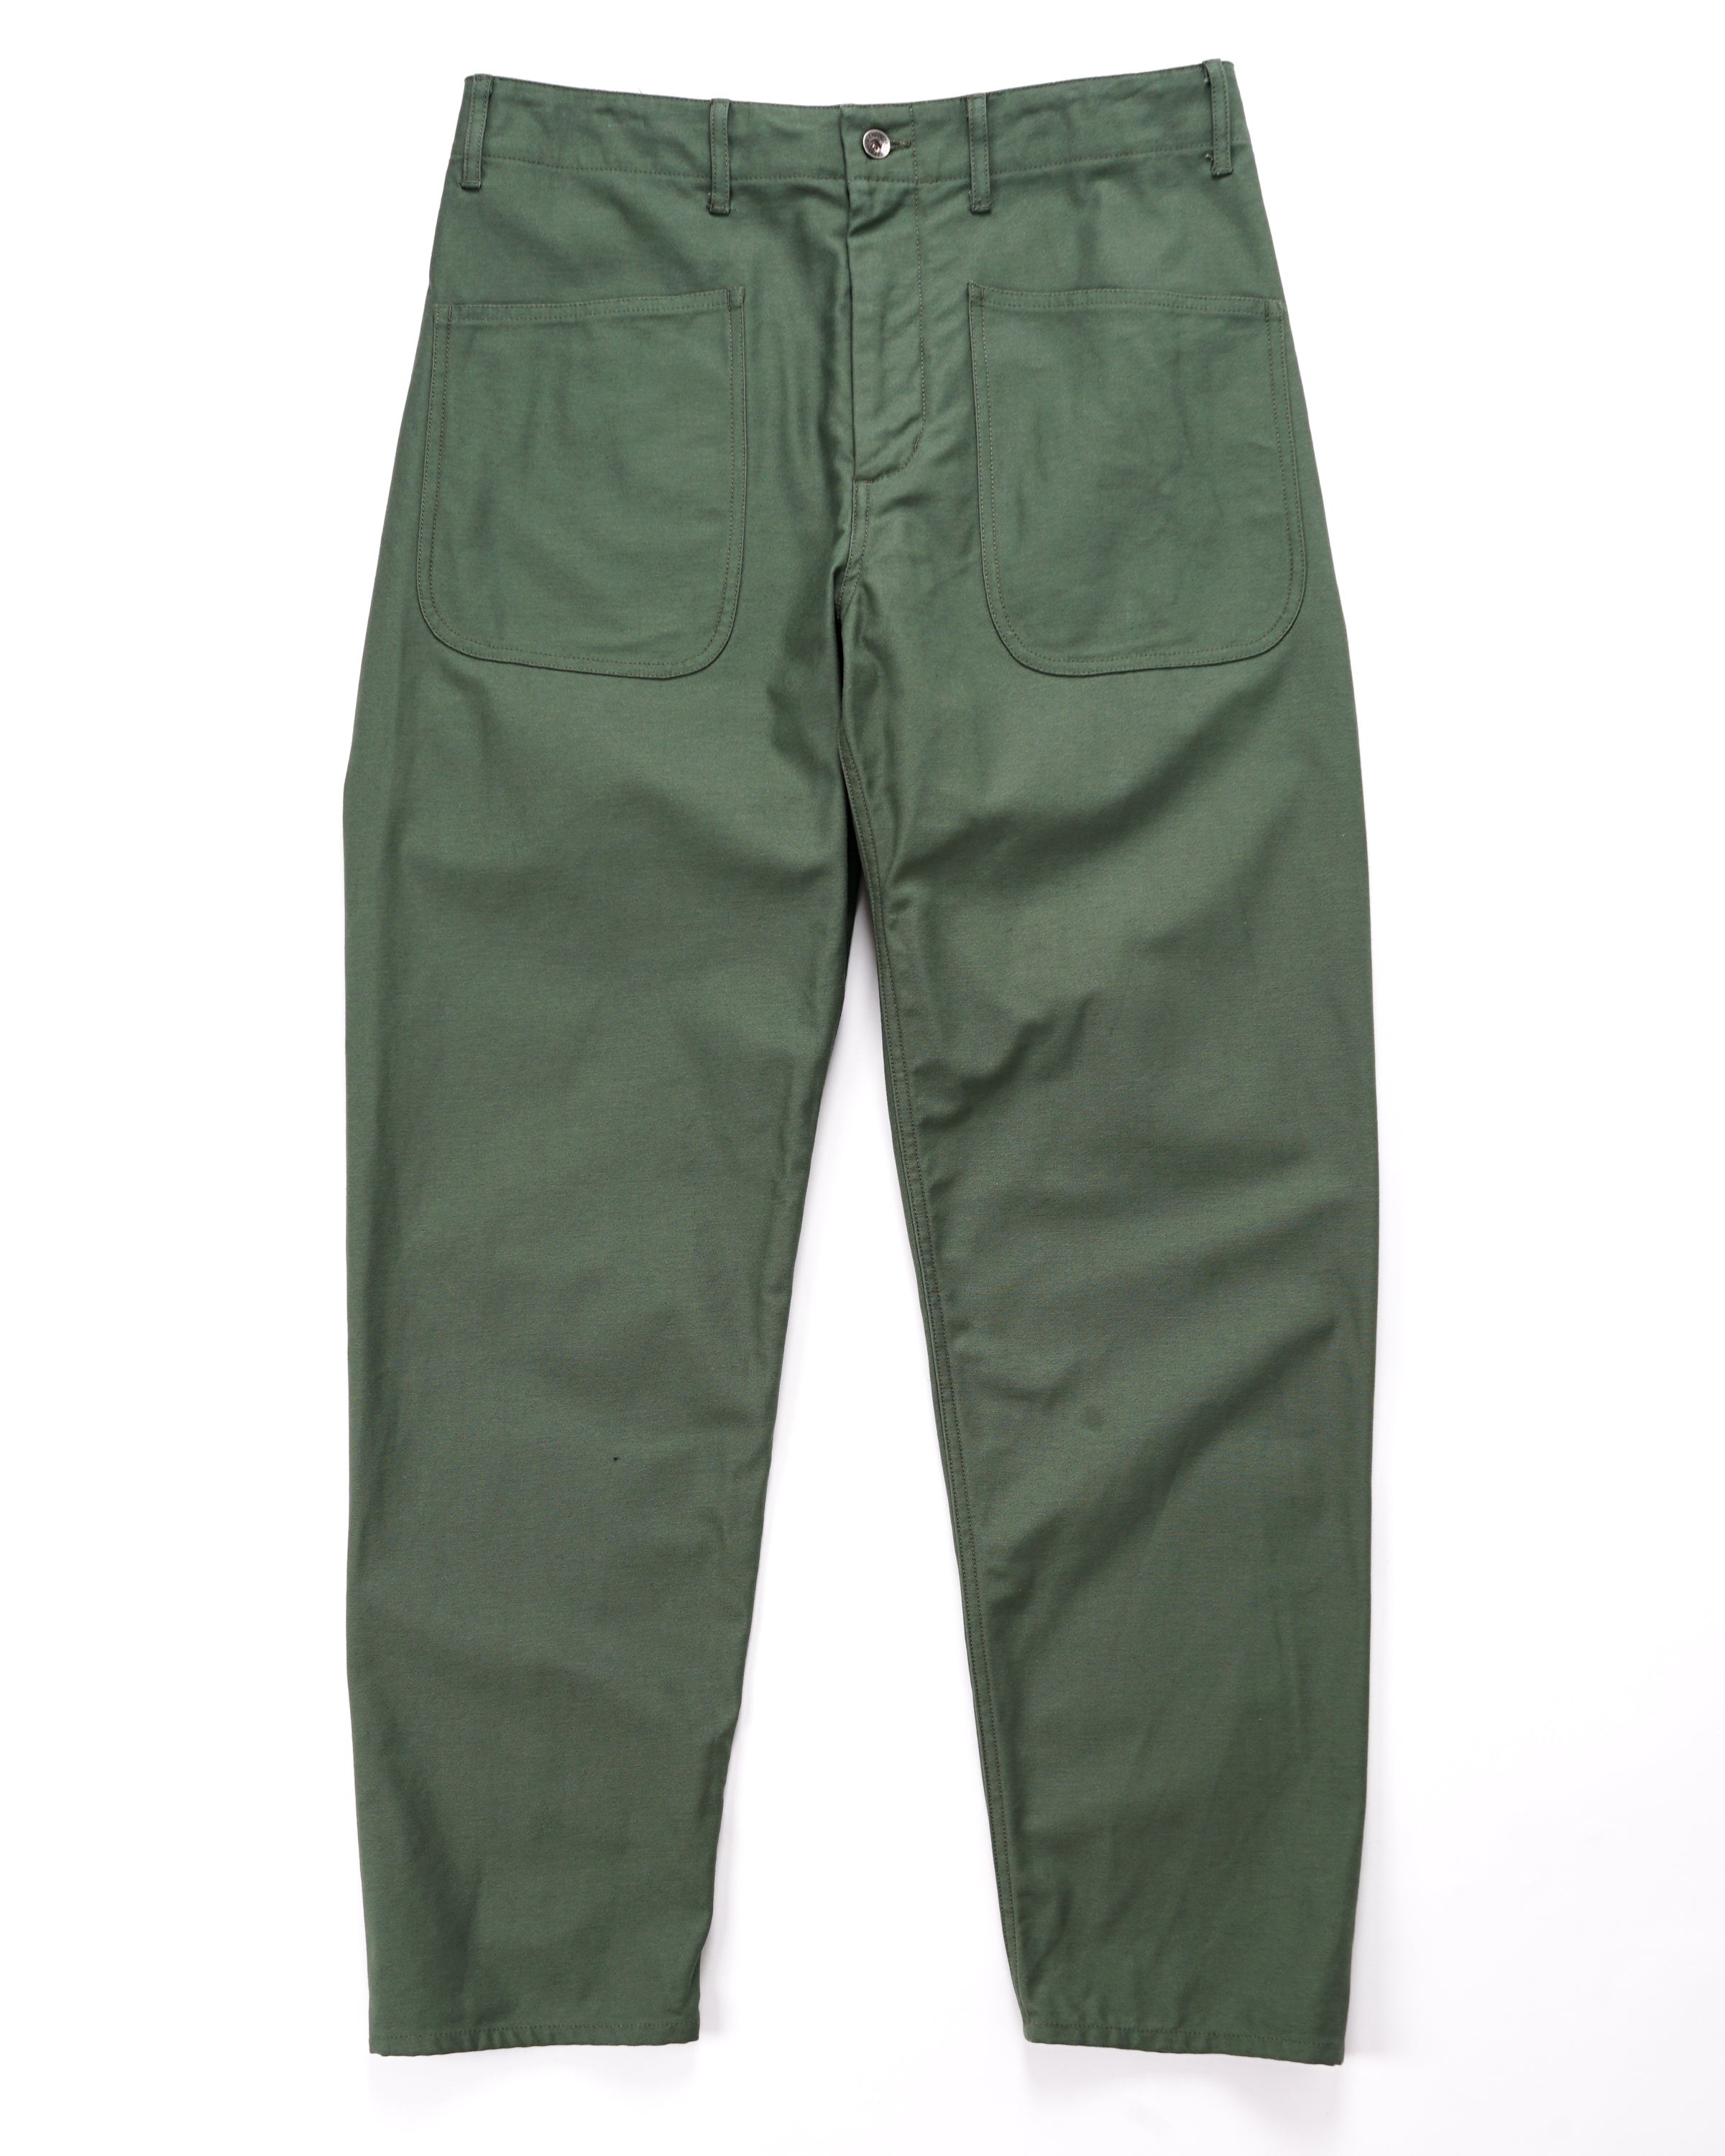 Utility Pant - Olive Cotton Reverse Sateen